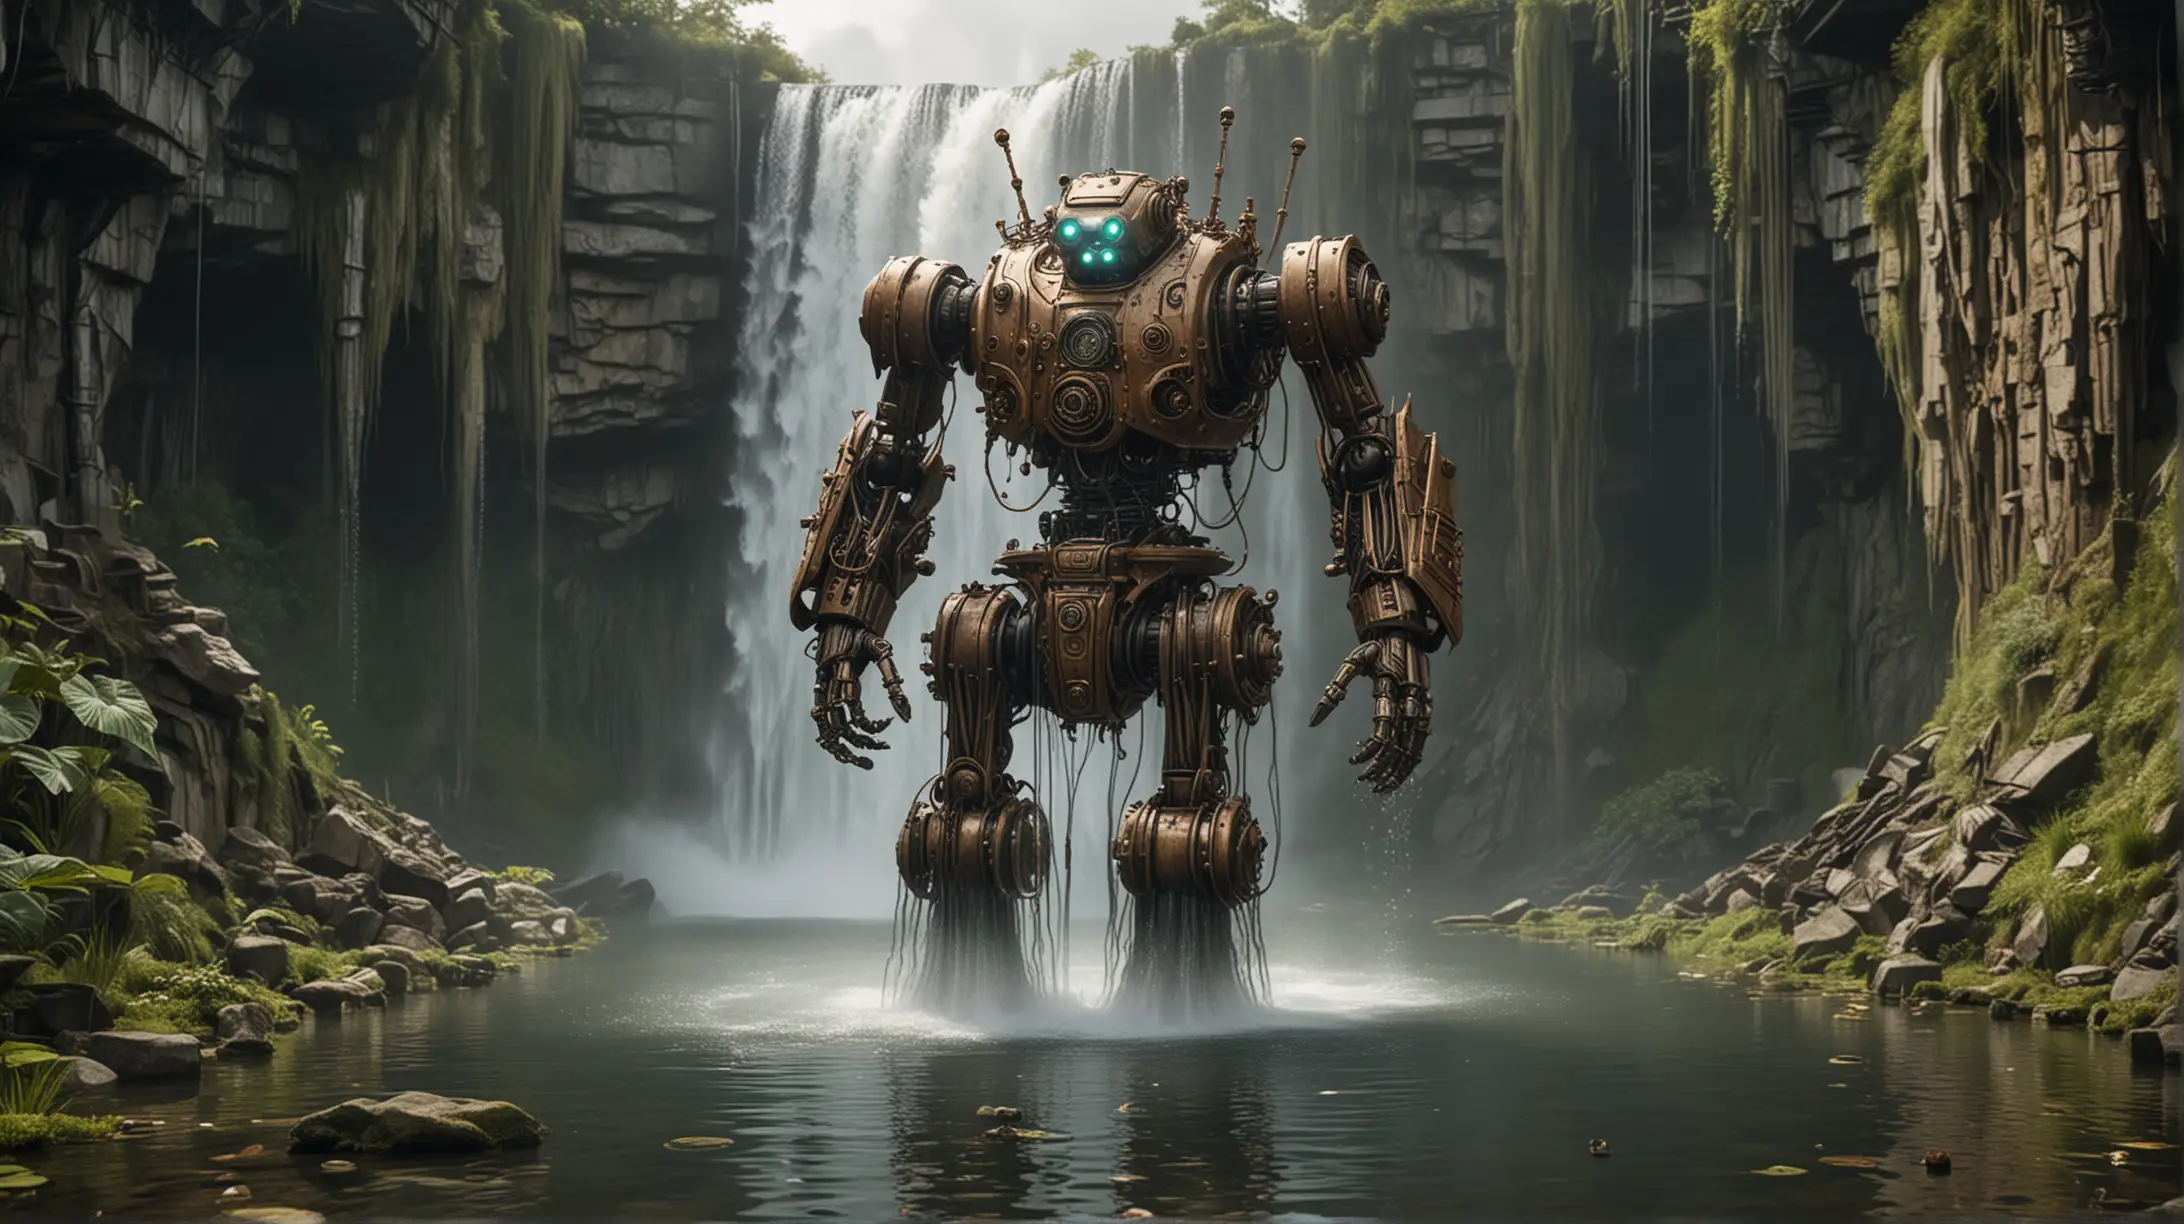 Steampunk Robot Relaxing in Waterfall Pond